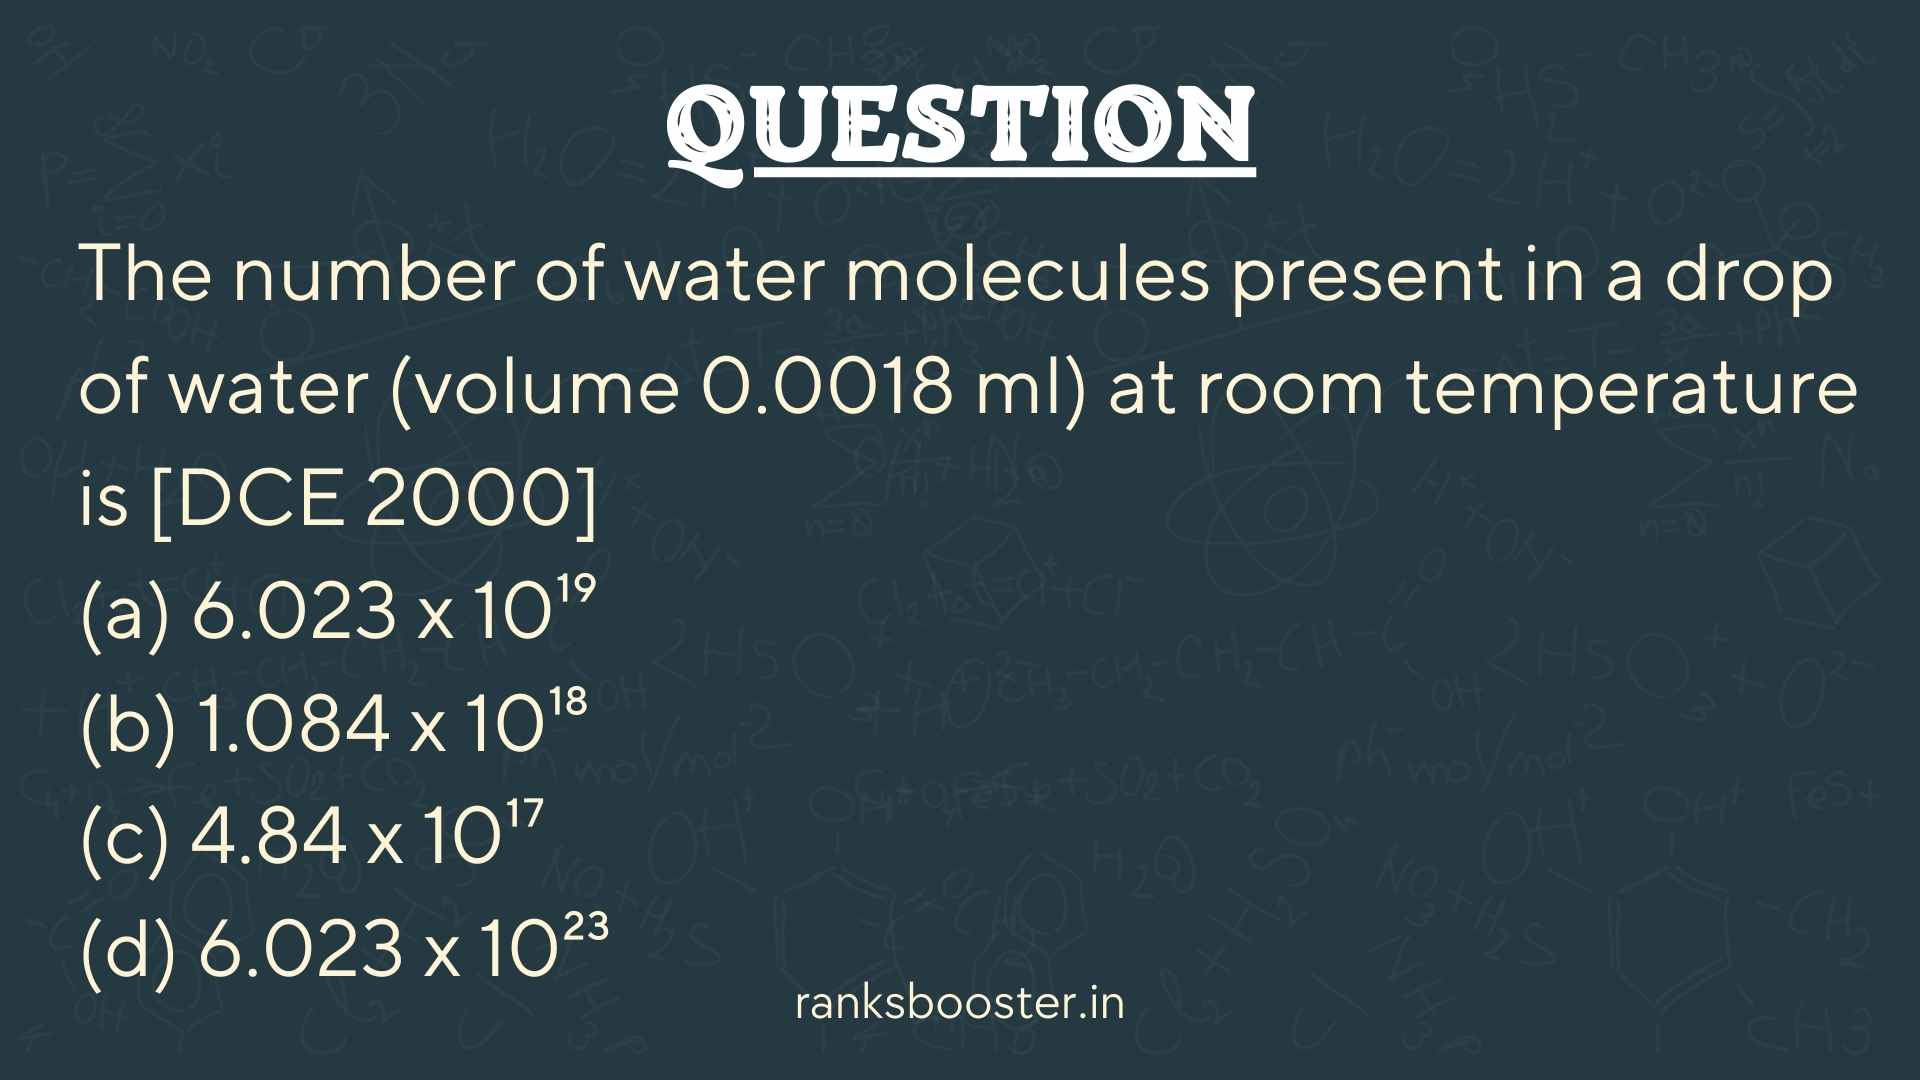 The number of water molecules present in a drop of water (volume 0.0018 ml) at room temperature is [DCE 2000] (a) 6.023 x 10¹⁹ (b) 1.084 x 10¹⁸ (c) 4.84 x 10¹⁷ (d) 6.023 x 10²³